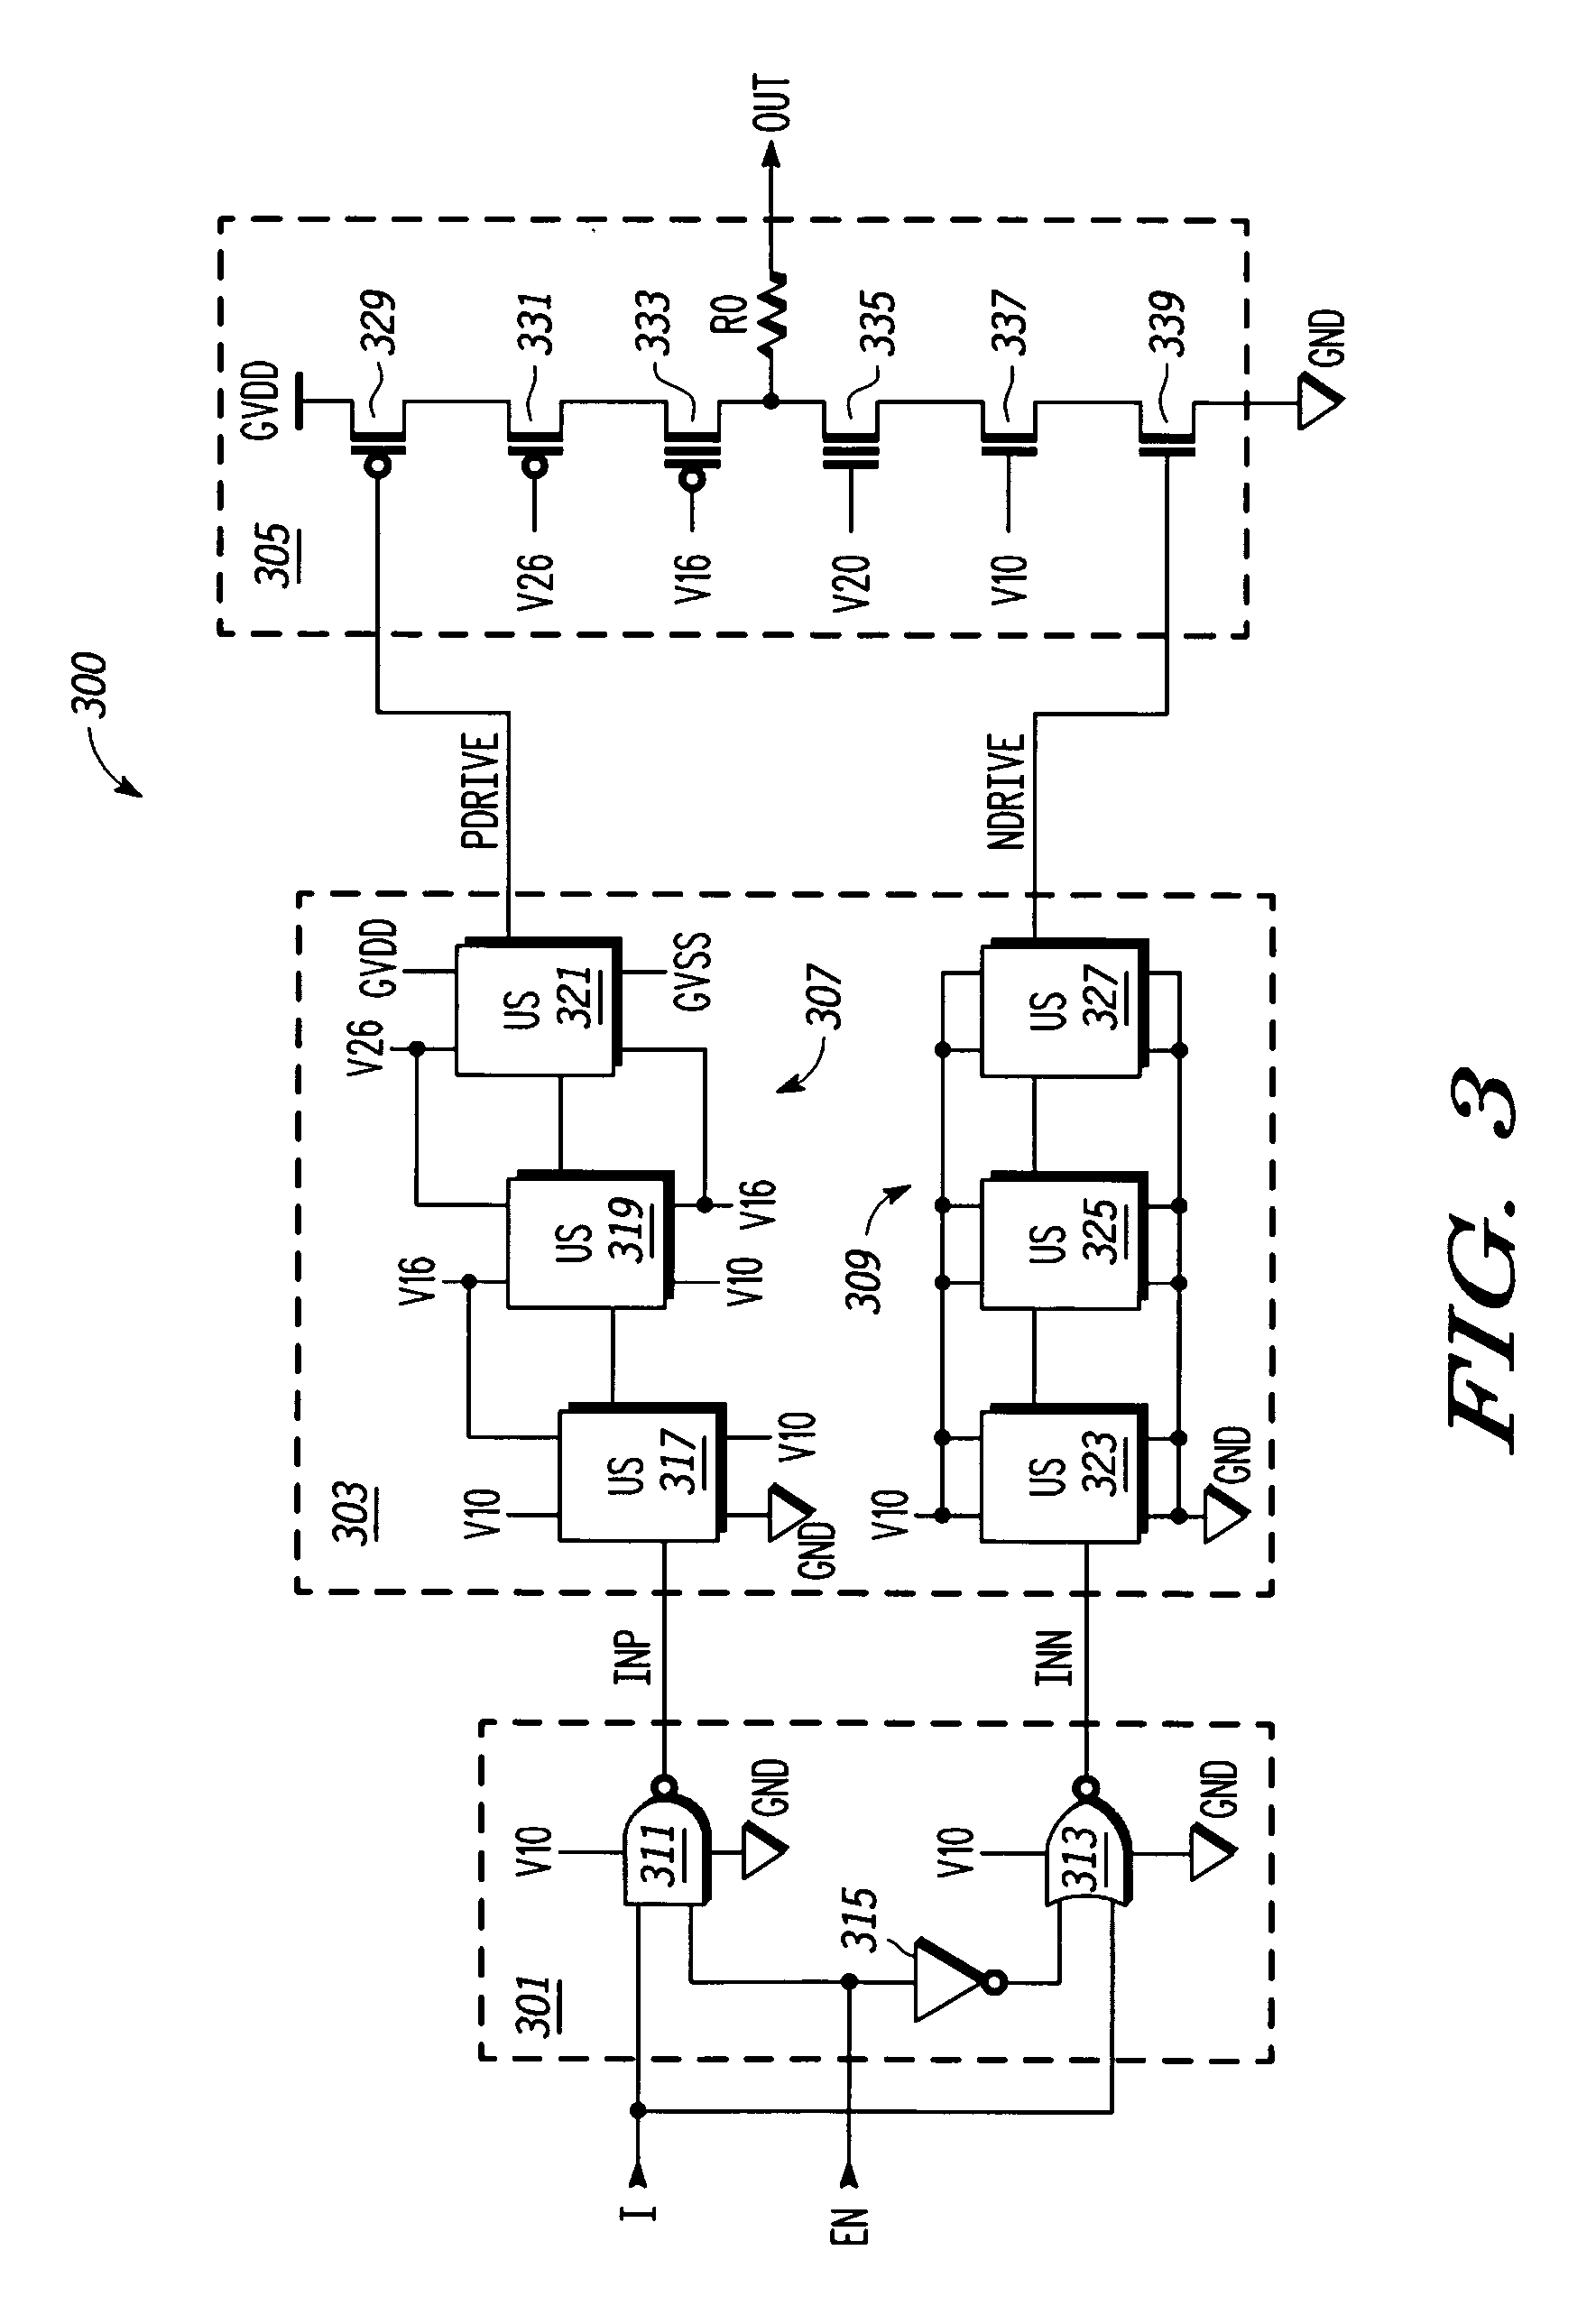 Cascadable level shifter cell